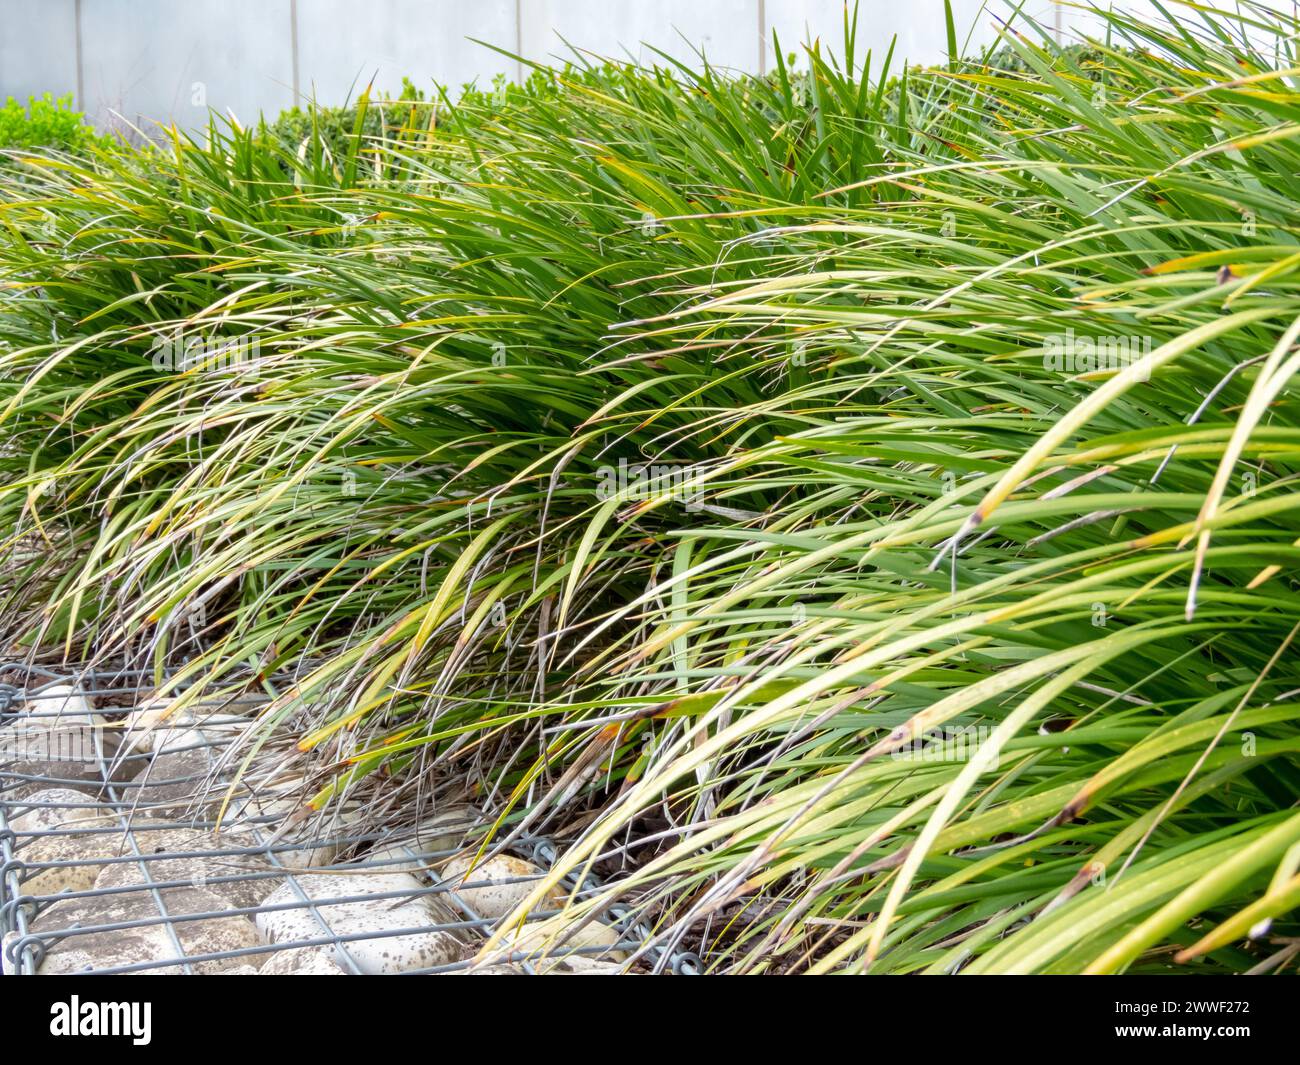 Carex morrowii or kan suge or Morrow's sedge or Japanese grass sedge or Japanese sedge leaves closeup. Ornamental grass plants and gabion in the urban Stock Photo